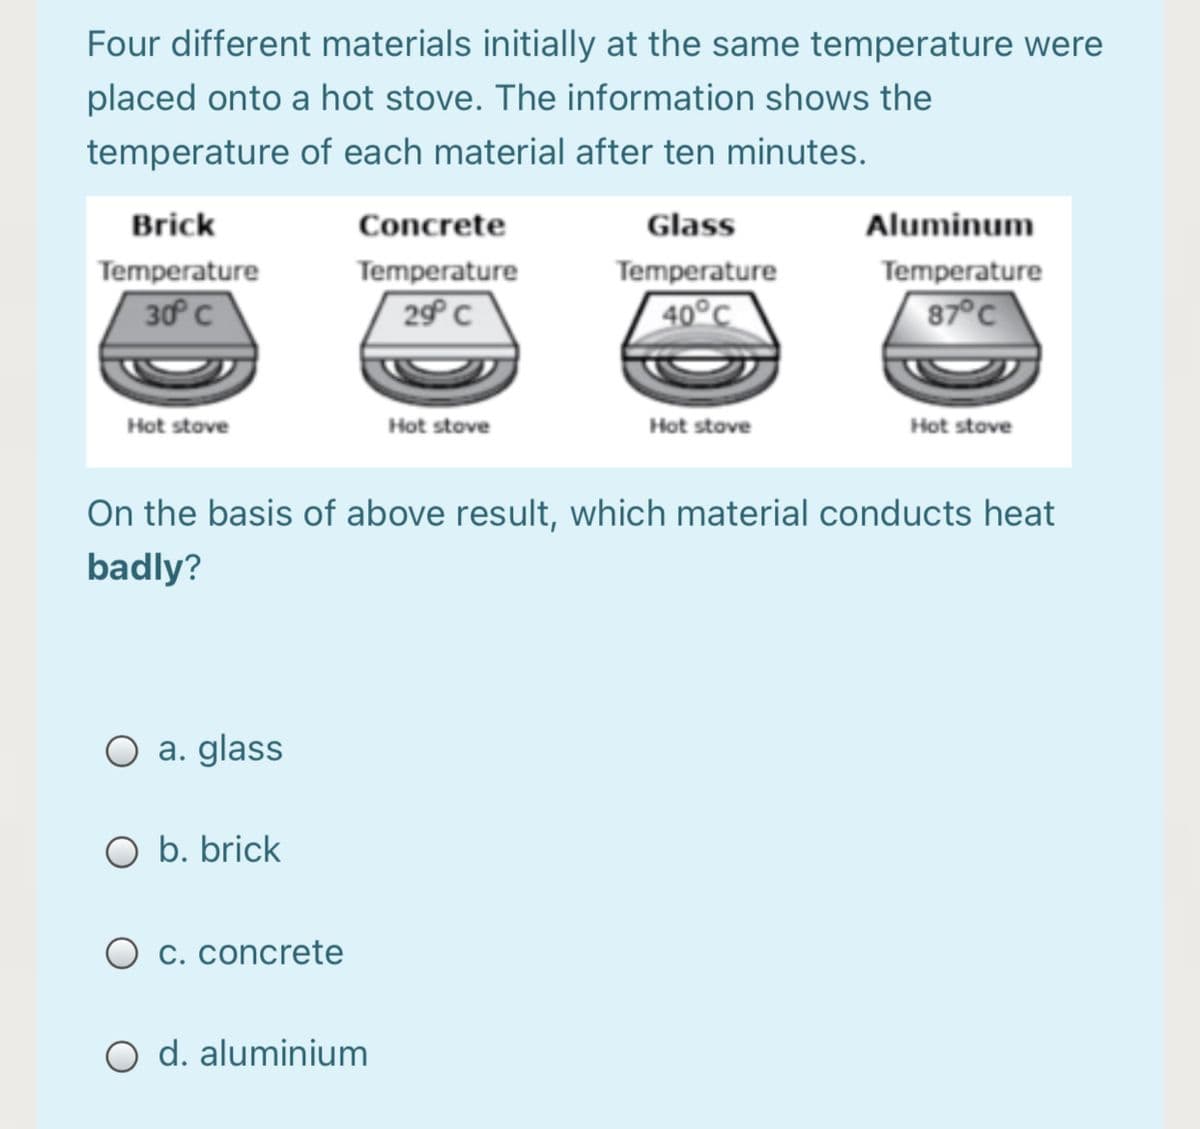 Four different materials initially at the same temperature were
placed onto a hot stove. The information shows the
temperature of each material after ten minutes.
Brick
Concrete
Glass
Aluminum
Temperature
Temperature
Temperature
Temperature
30 C
29 C
40°C
87°C
Hot stove
Hot stove
Hot stove
Hot stove
On the basis of above result, which material conducts heat
badly?
O a. glass
O b. brick
O c. concrete
O d. aluminium
